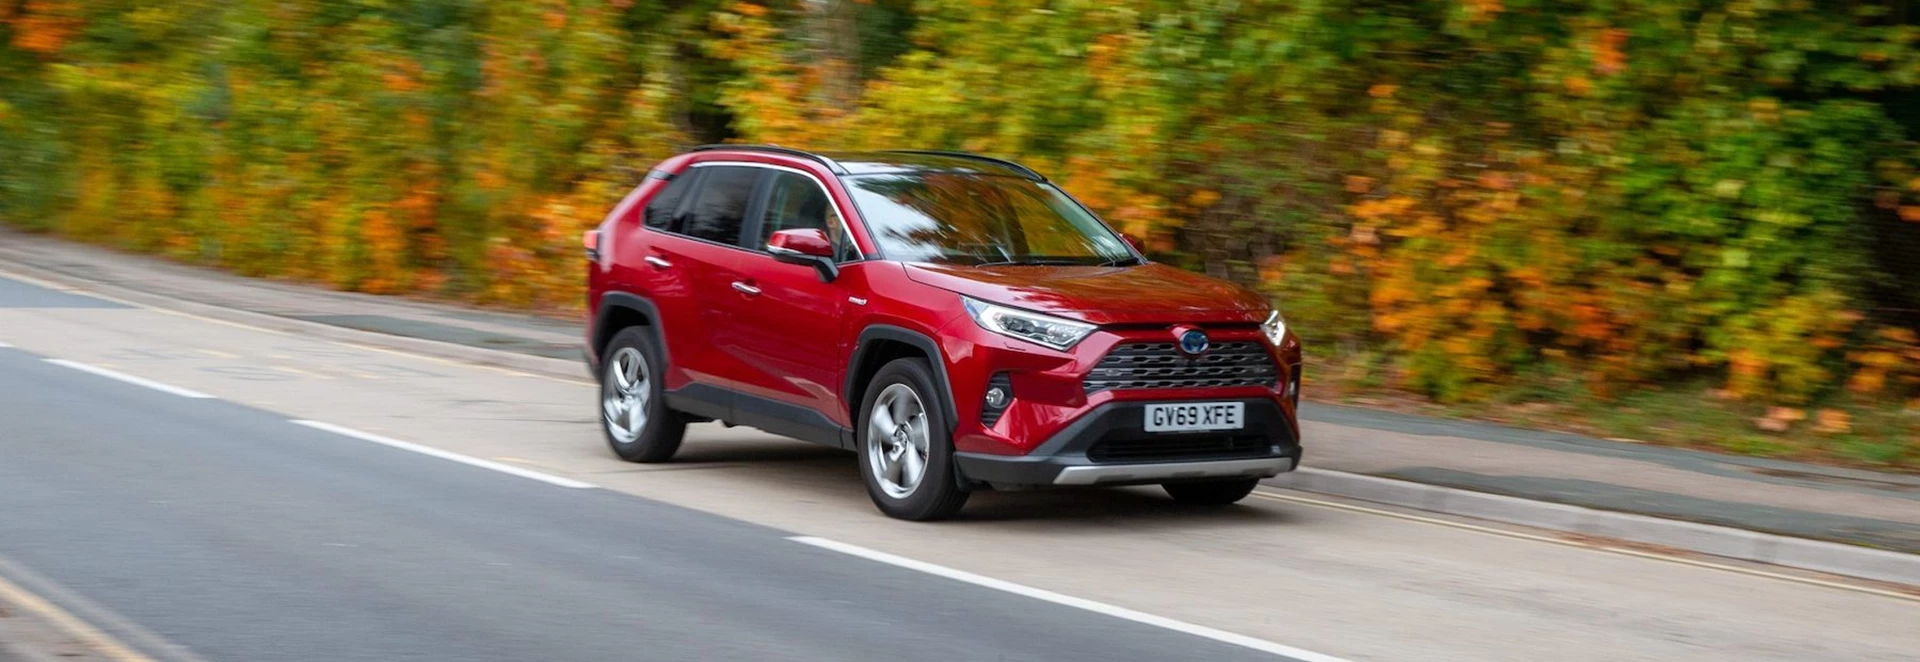 Buyer’s guide to the Toyota RAV4 